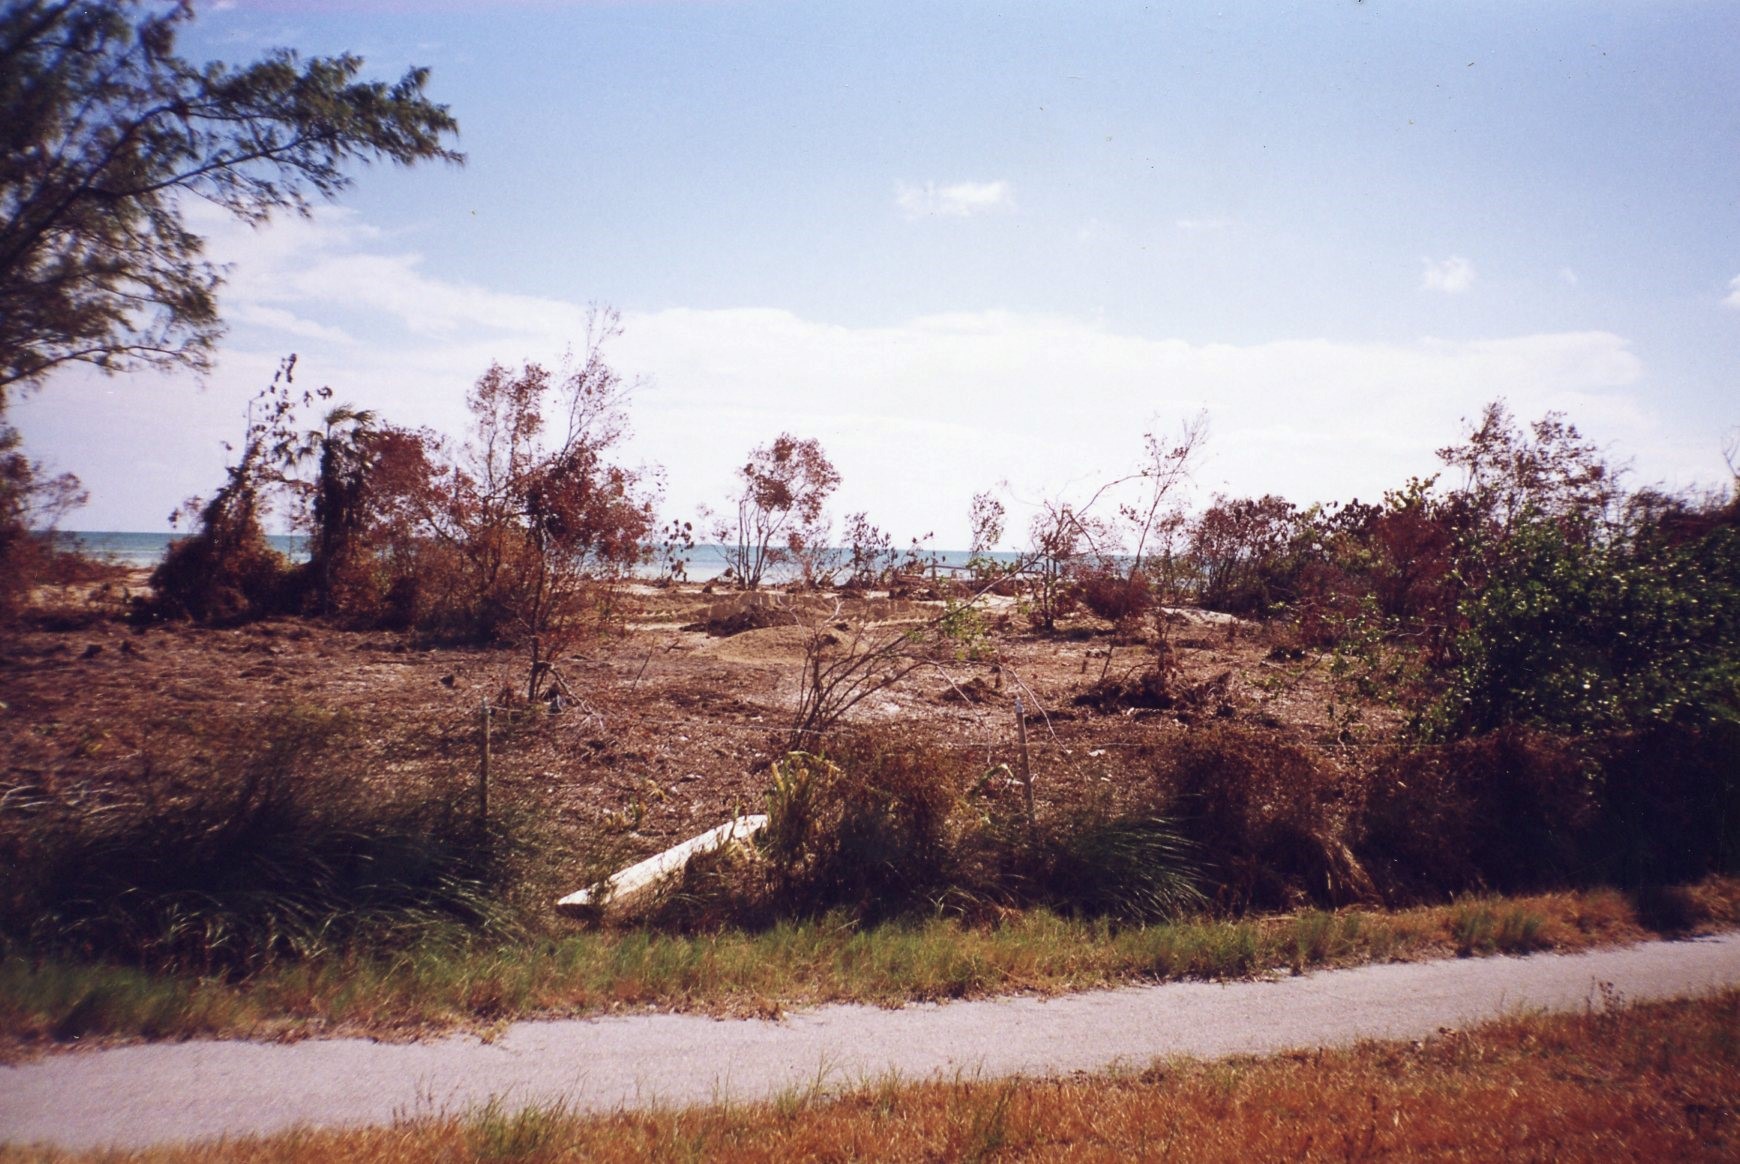 The campground’s vegetation was impacted, post Hurricane Irma.